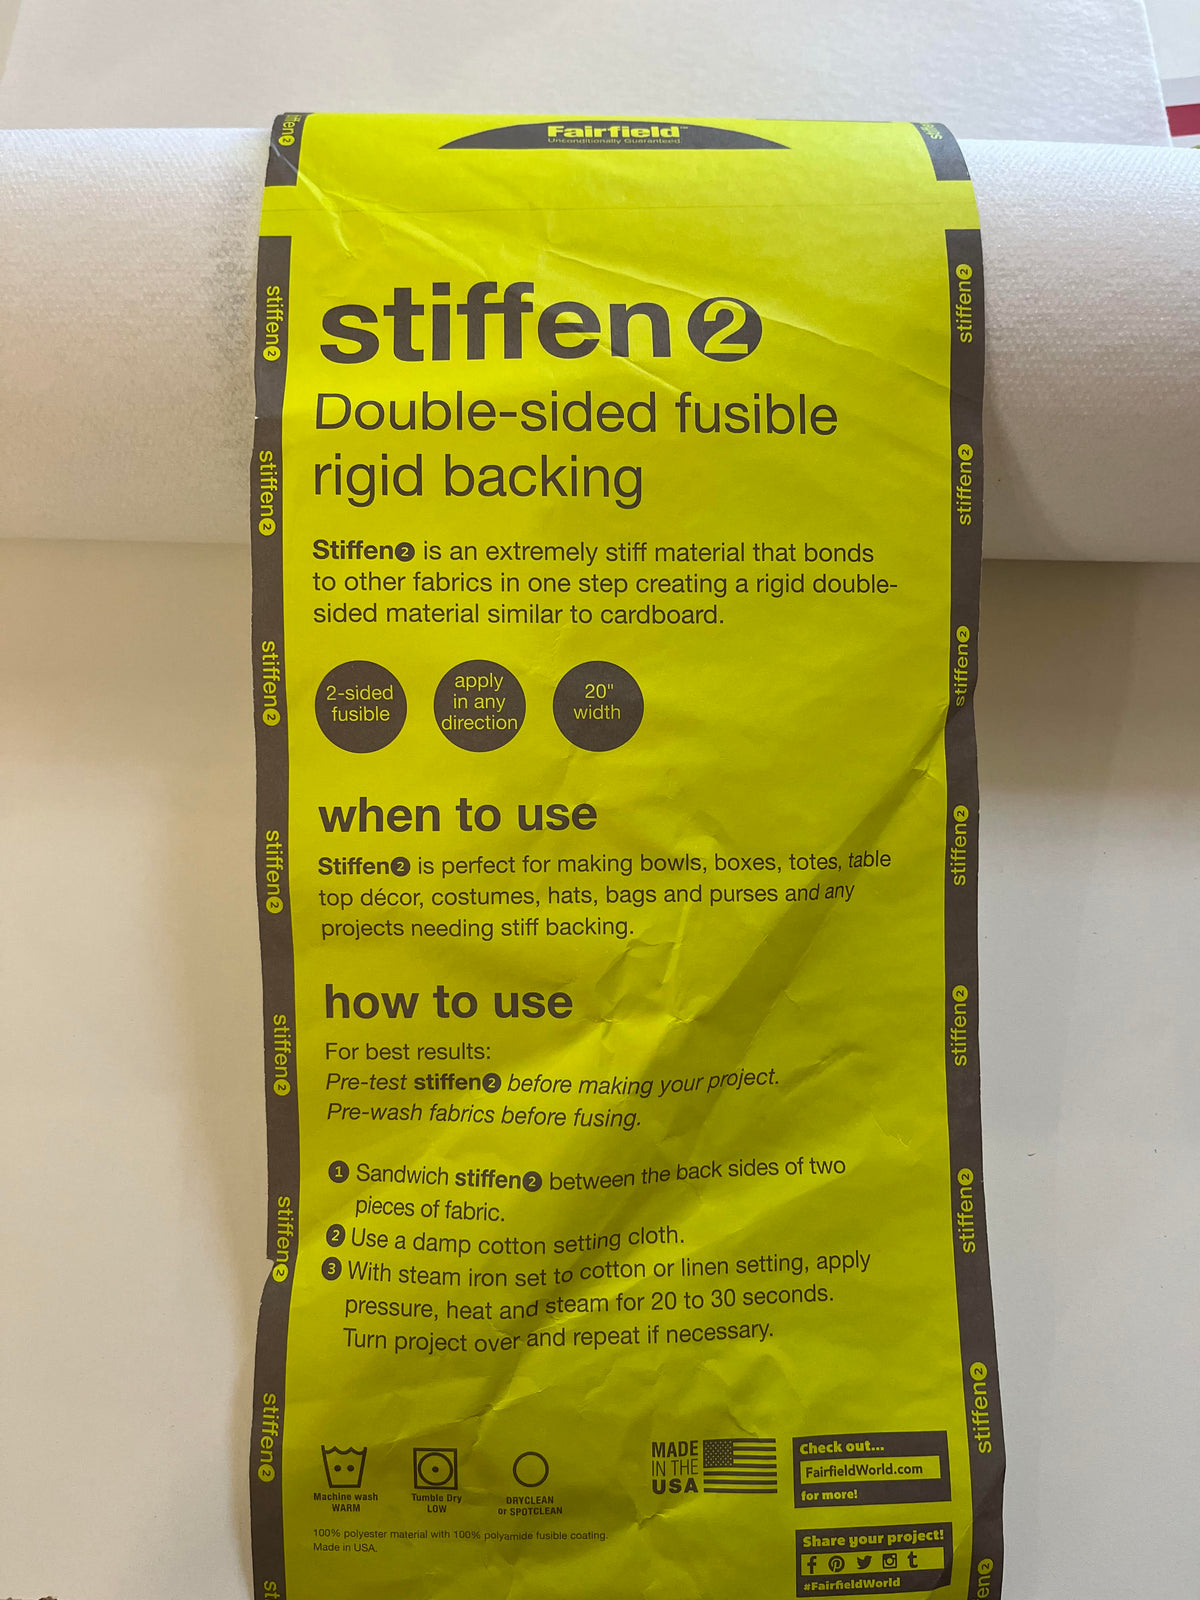 Stiffen 2 - Double-sided Fusible Rigid backing